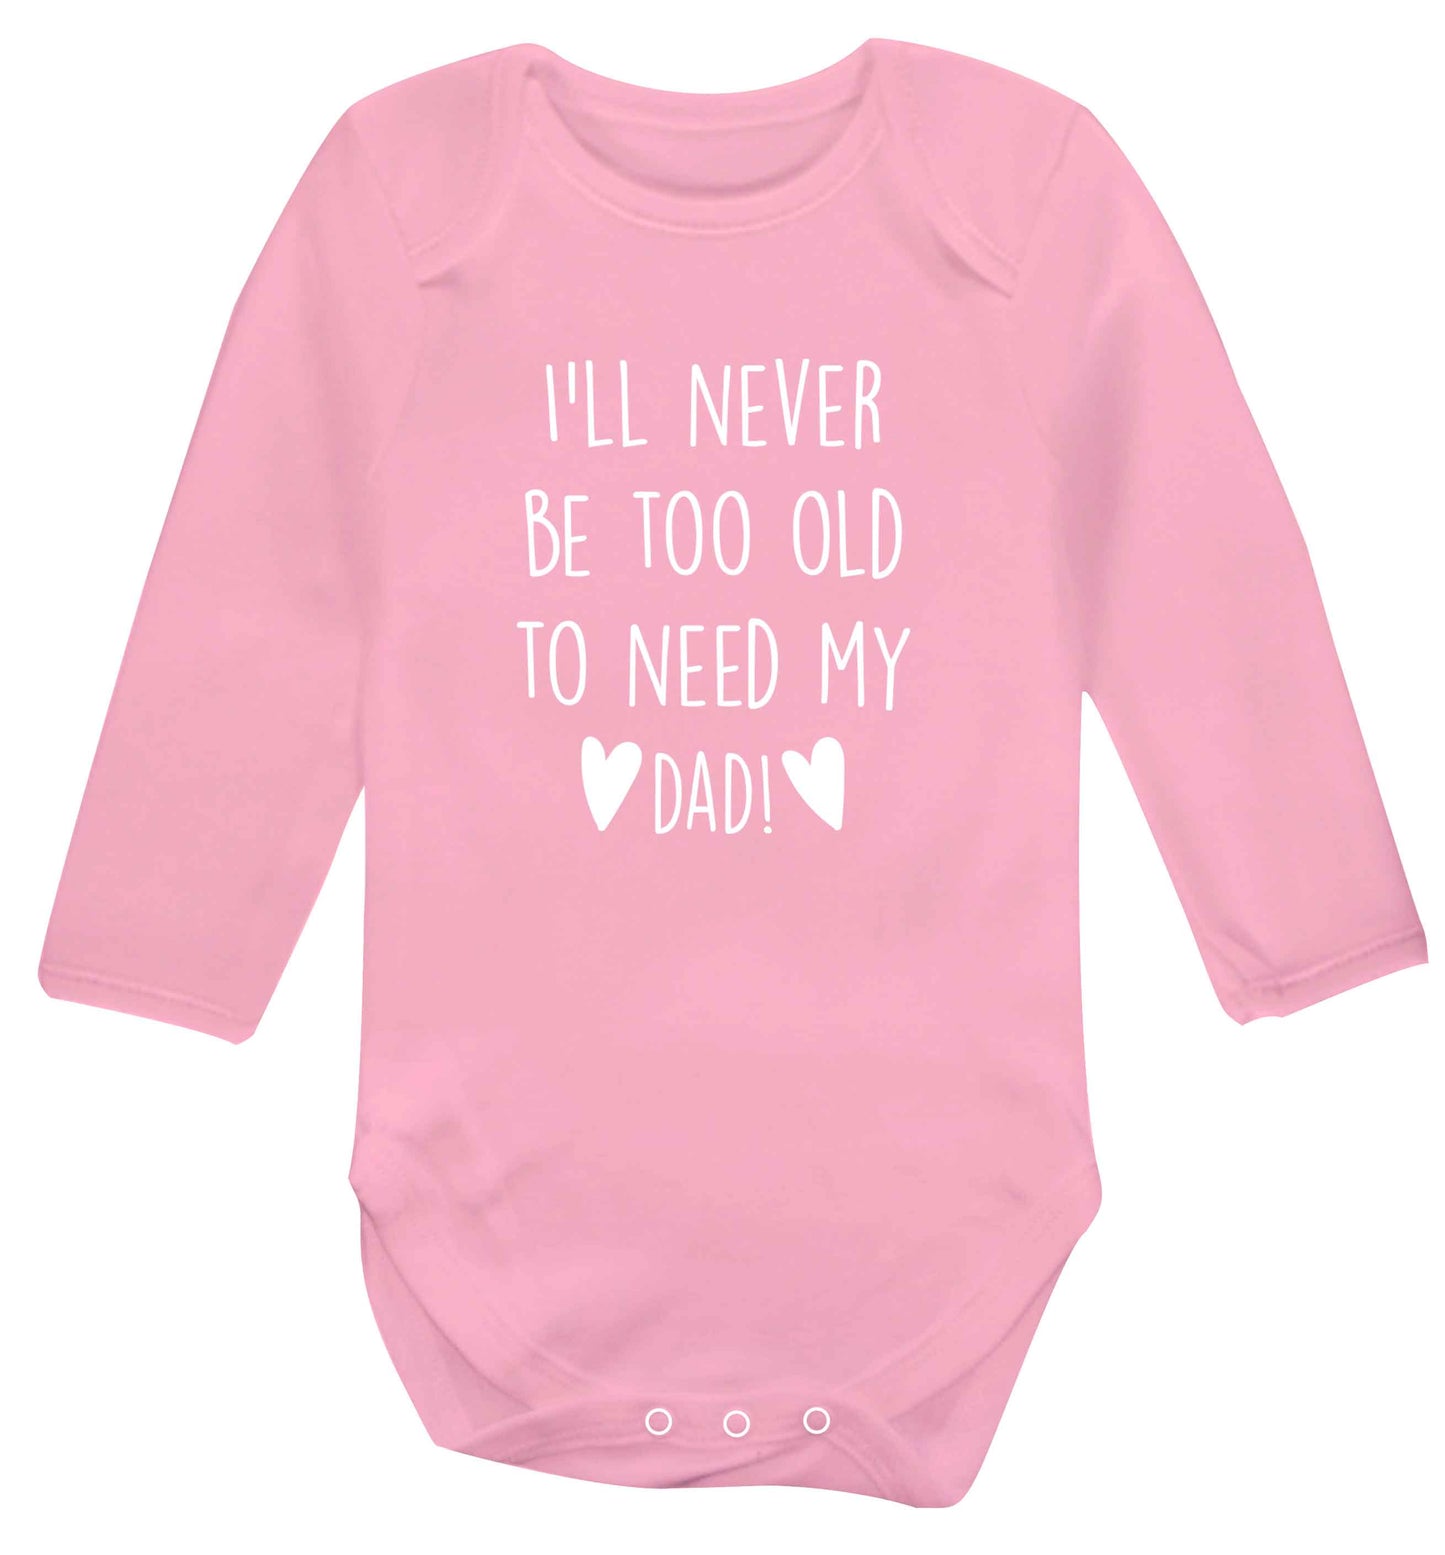 I'll never be too old to need my dad baby vest long sleeved pale pink 6-12 months